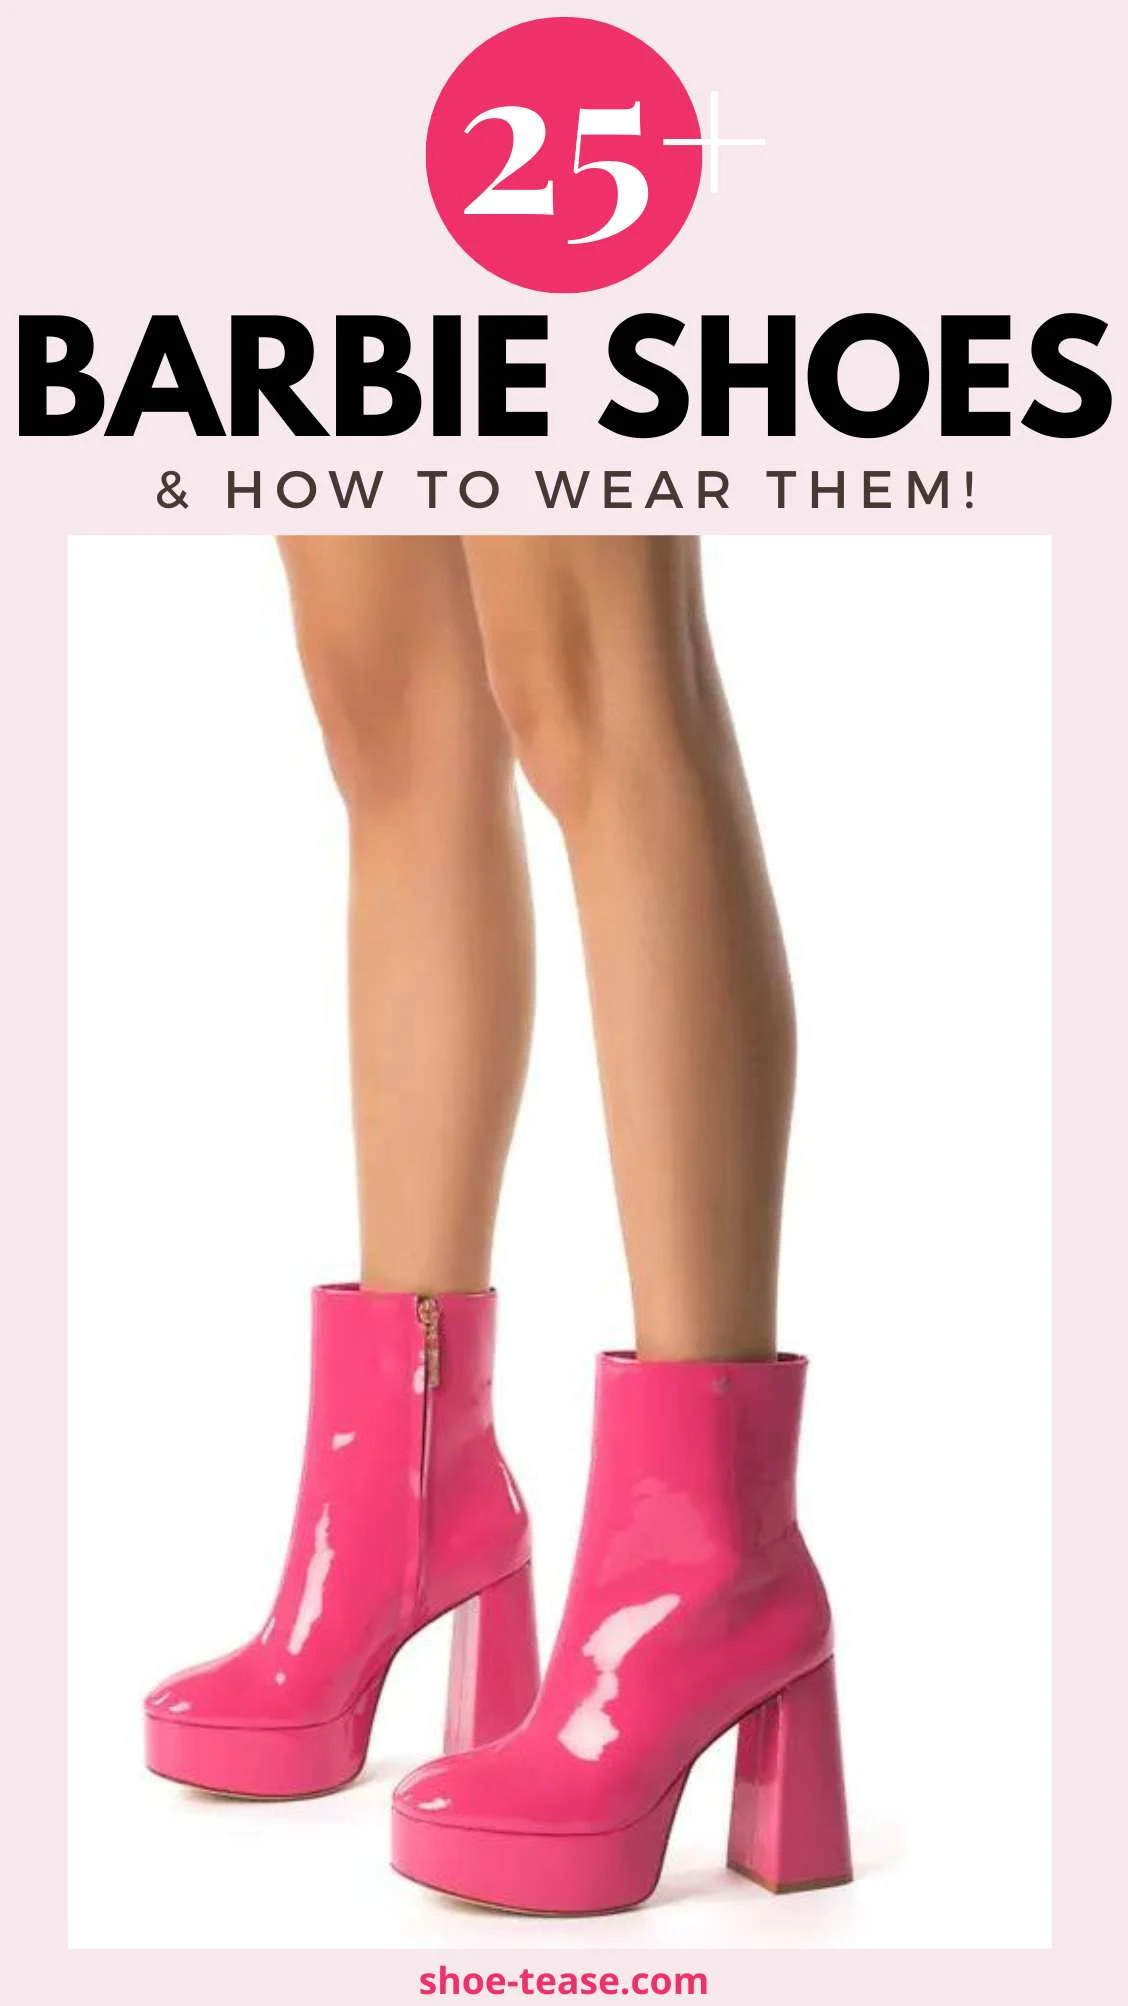 Woman wearing barbie core fashion shoes in platform boot form under text reading 25 plus barbie shoes and how to wear them.